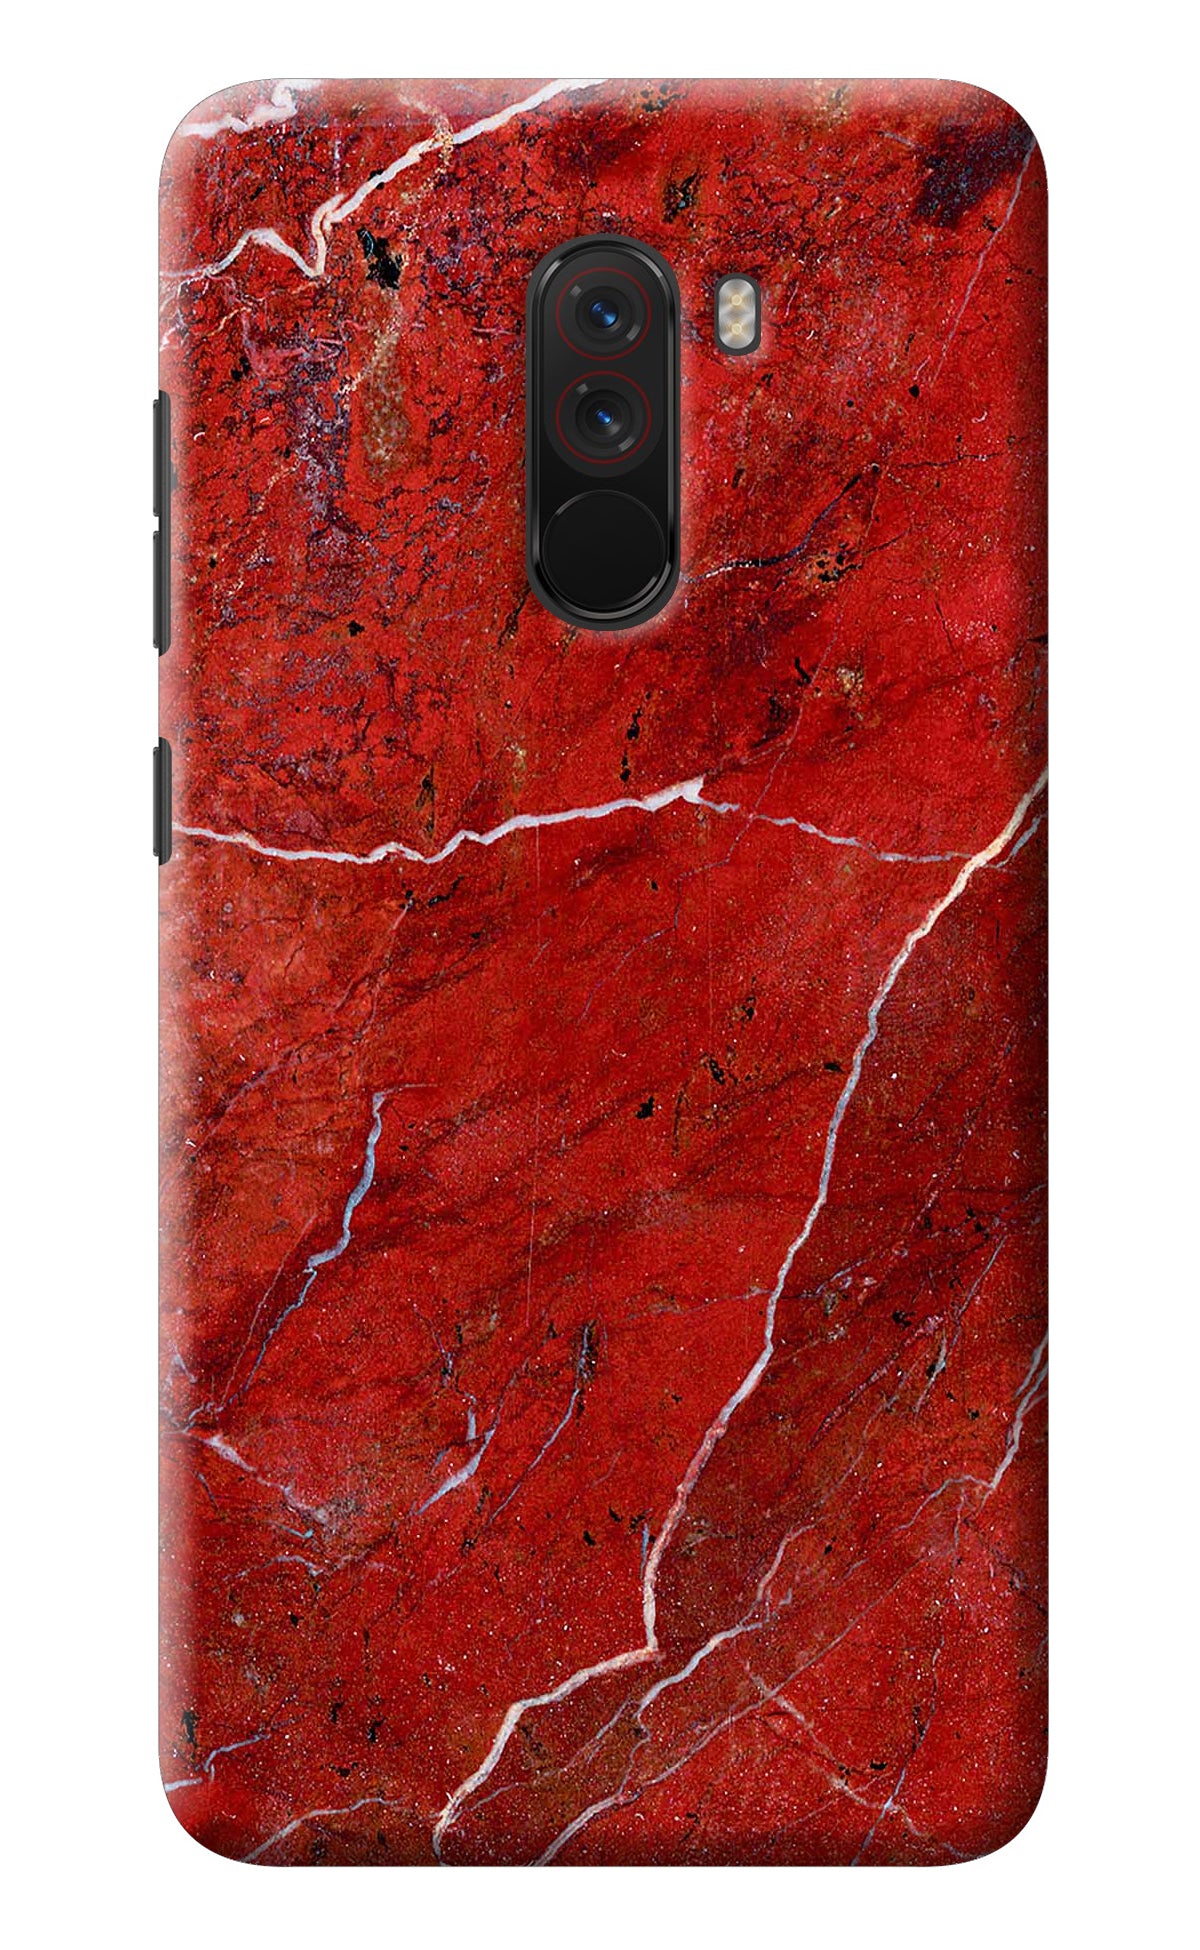 Red Marble Design Poco F1 Back Cover